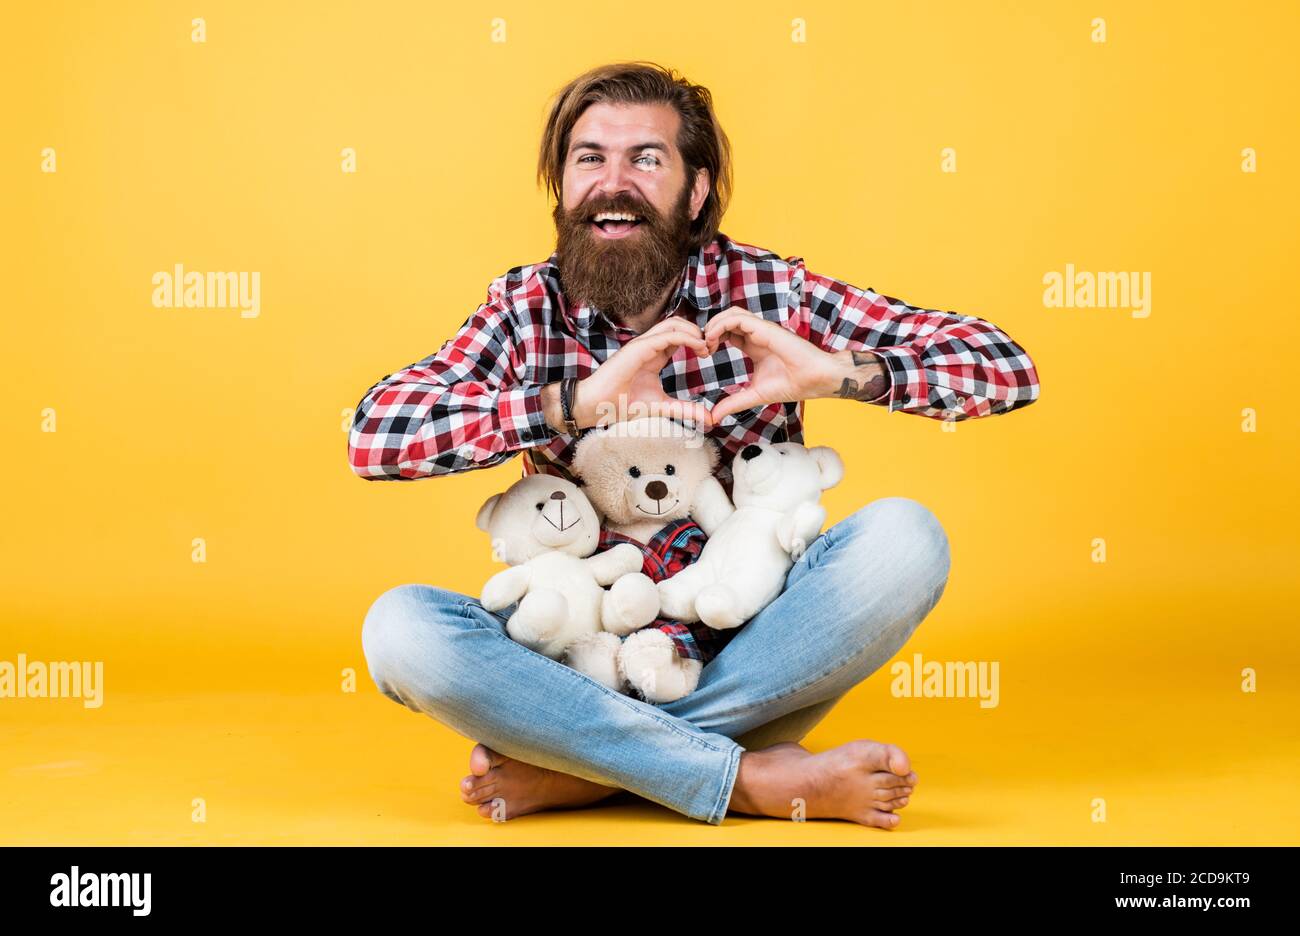 my heart is yours. Man with beard hold cute toy bear. Man holds teddy bear. Gifts and holidays concept. This is for you. hipster like animal toy. Birthday holiday party celebration. feel happiness. Stock Photo